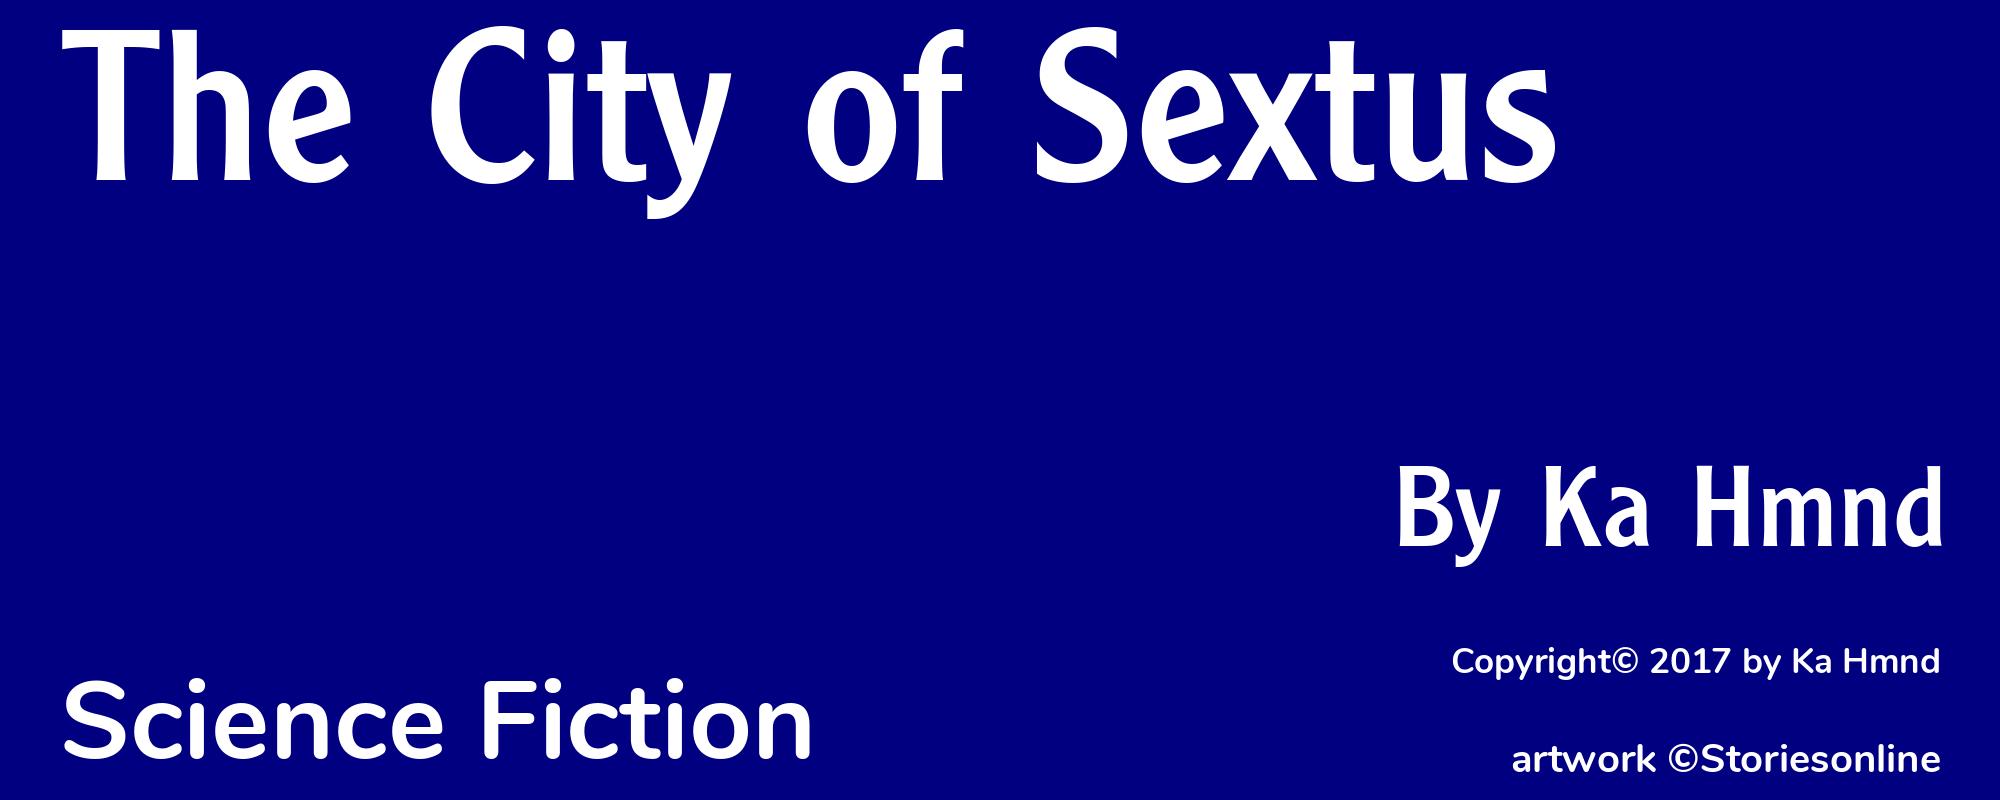 The City of Sextus - Cover